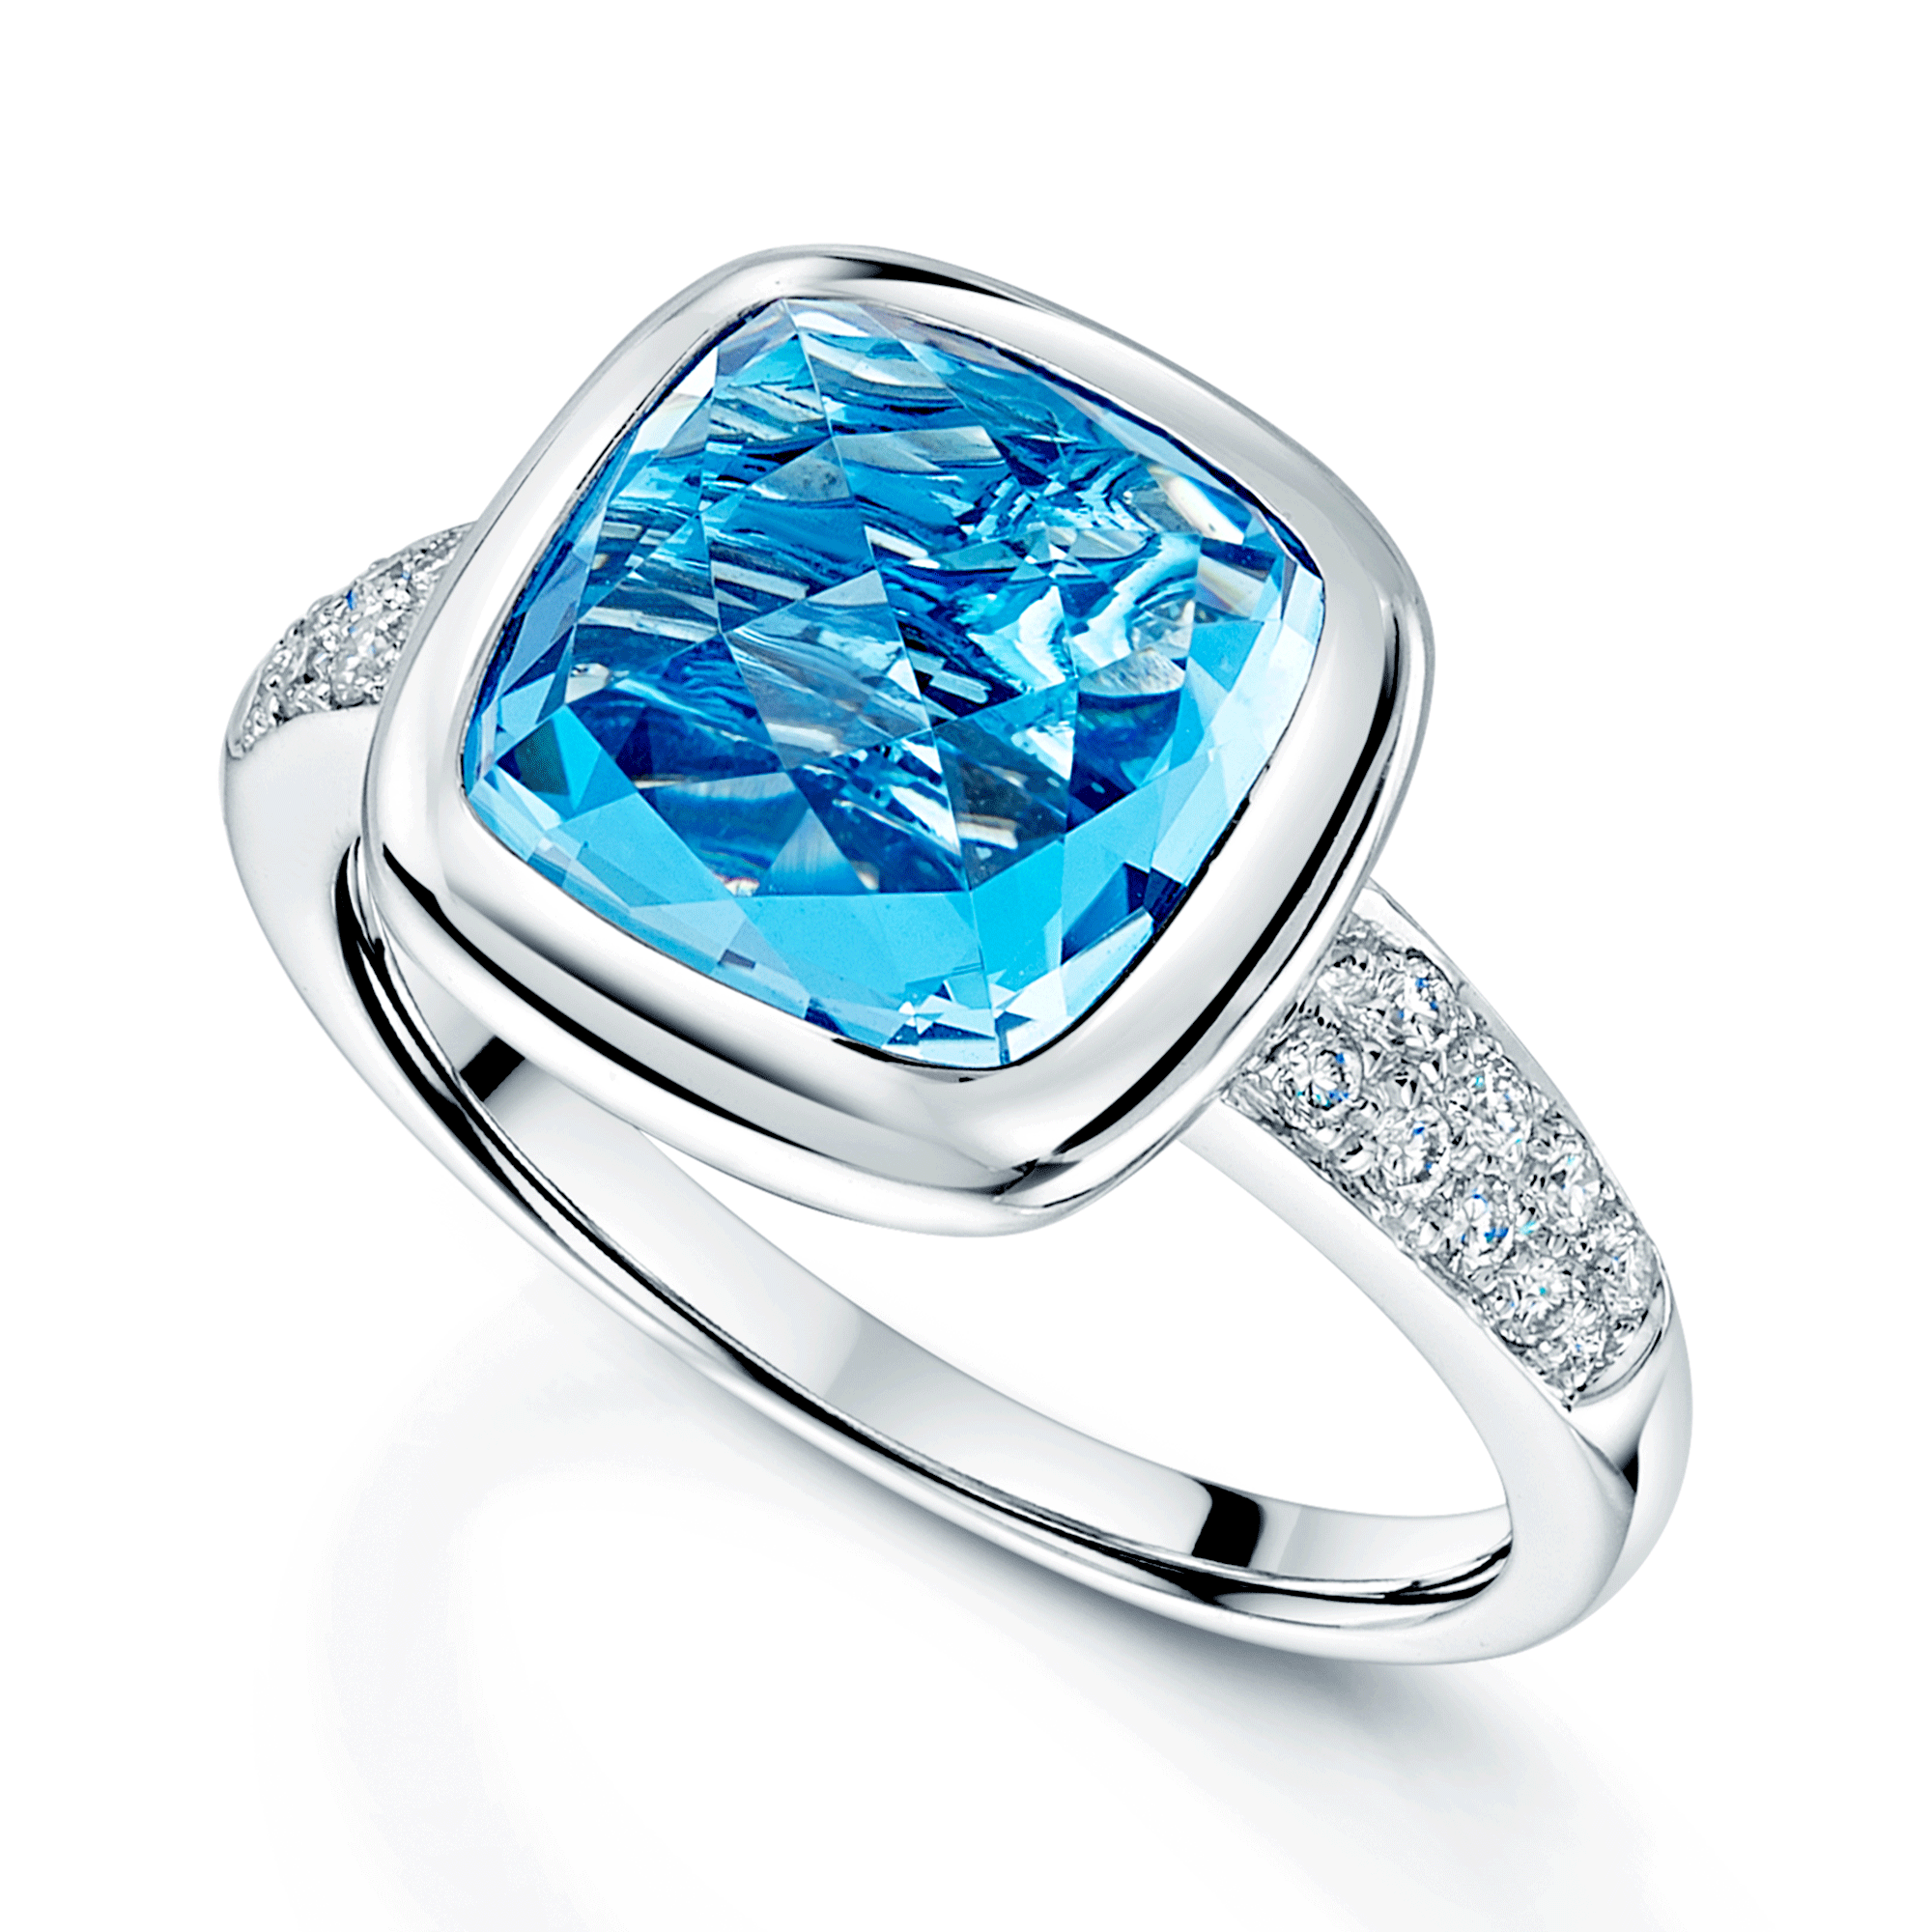 18ct White Gold Cushion Cut Blue Topaz Dress Ring With Diamond Pave Set Shoulders